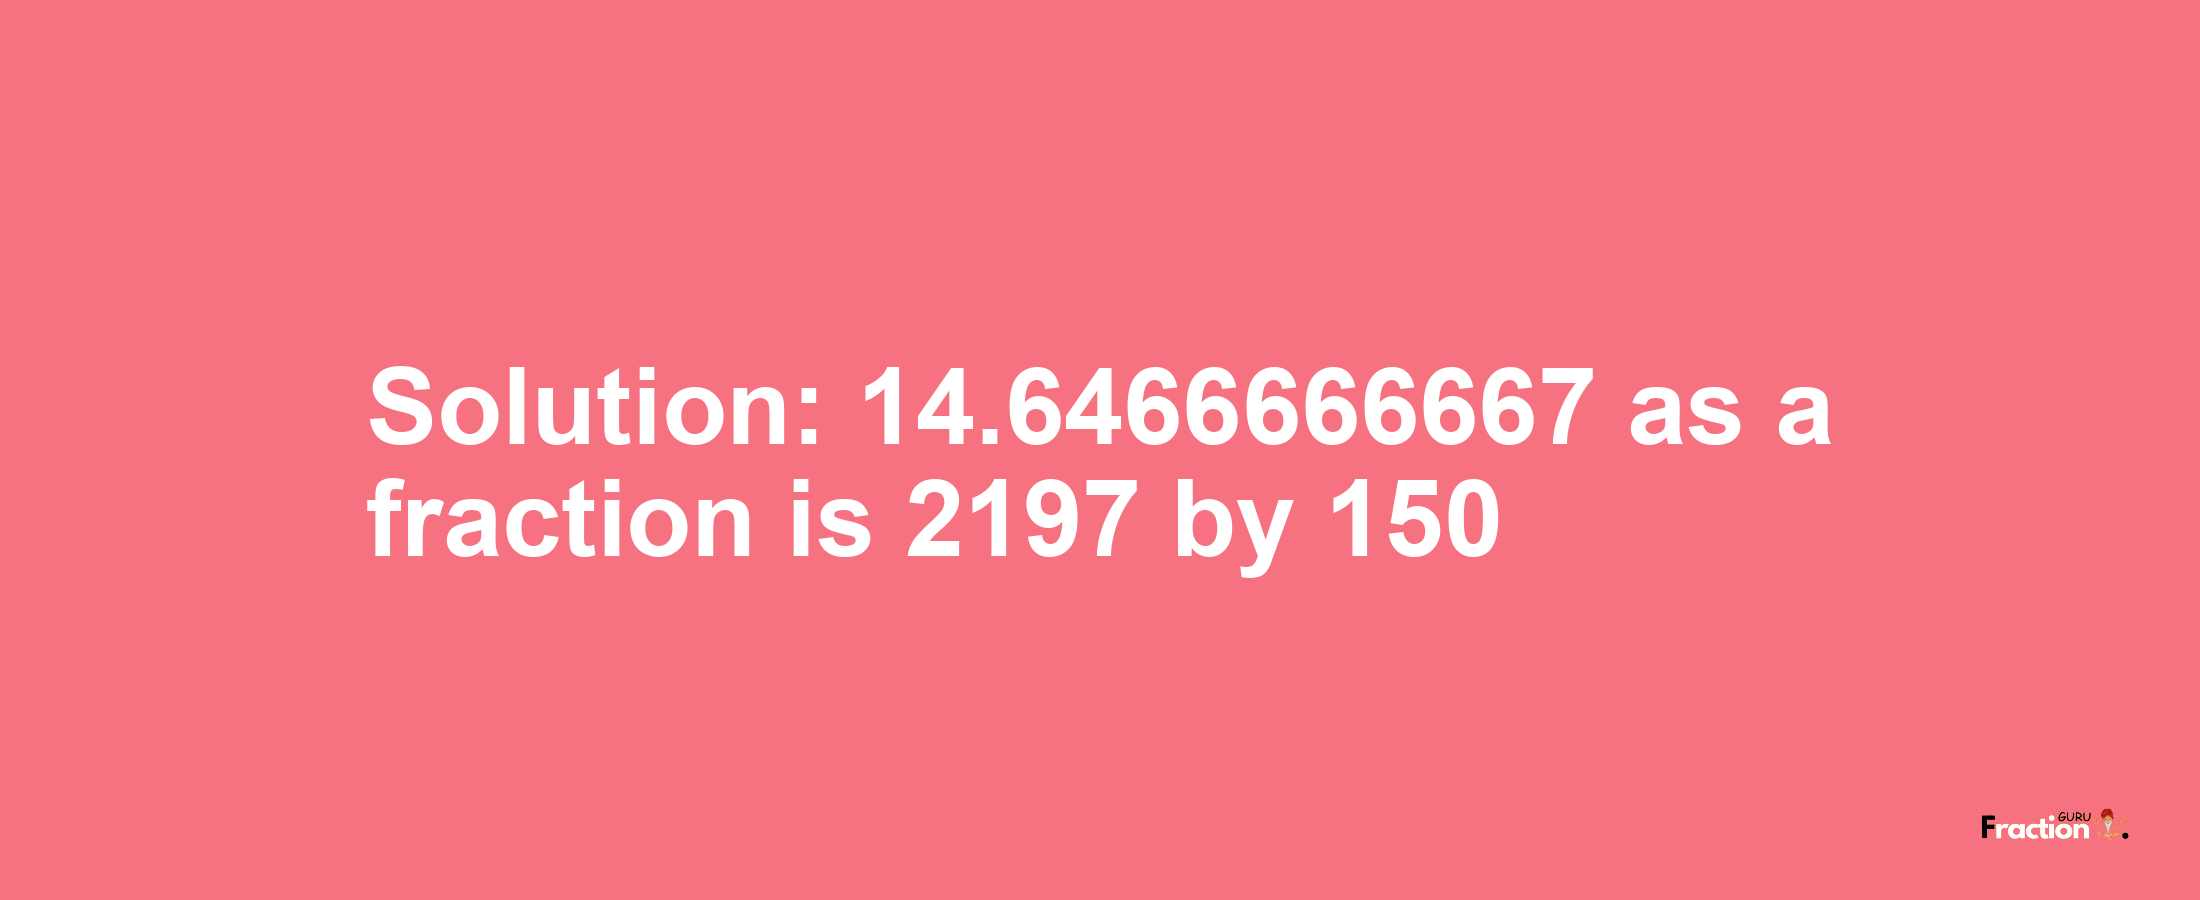 Solution:14.6466666667 as a fraction is 2197/150